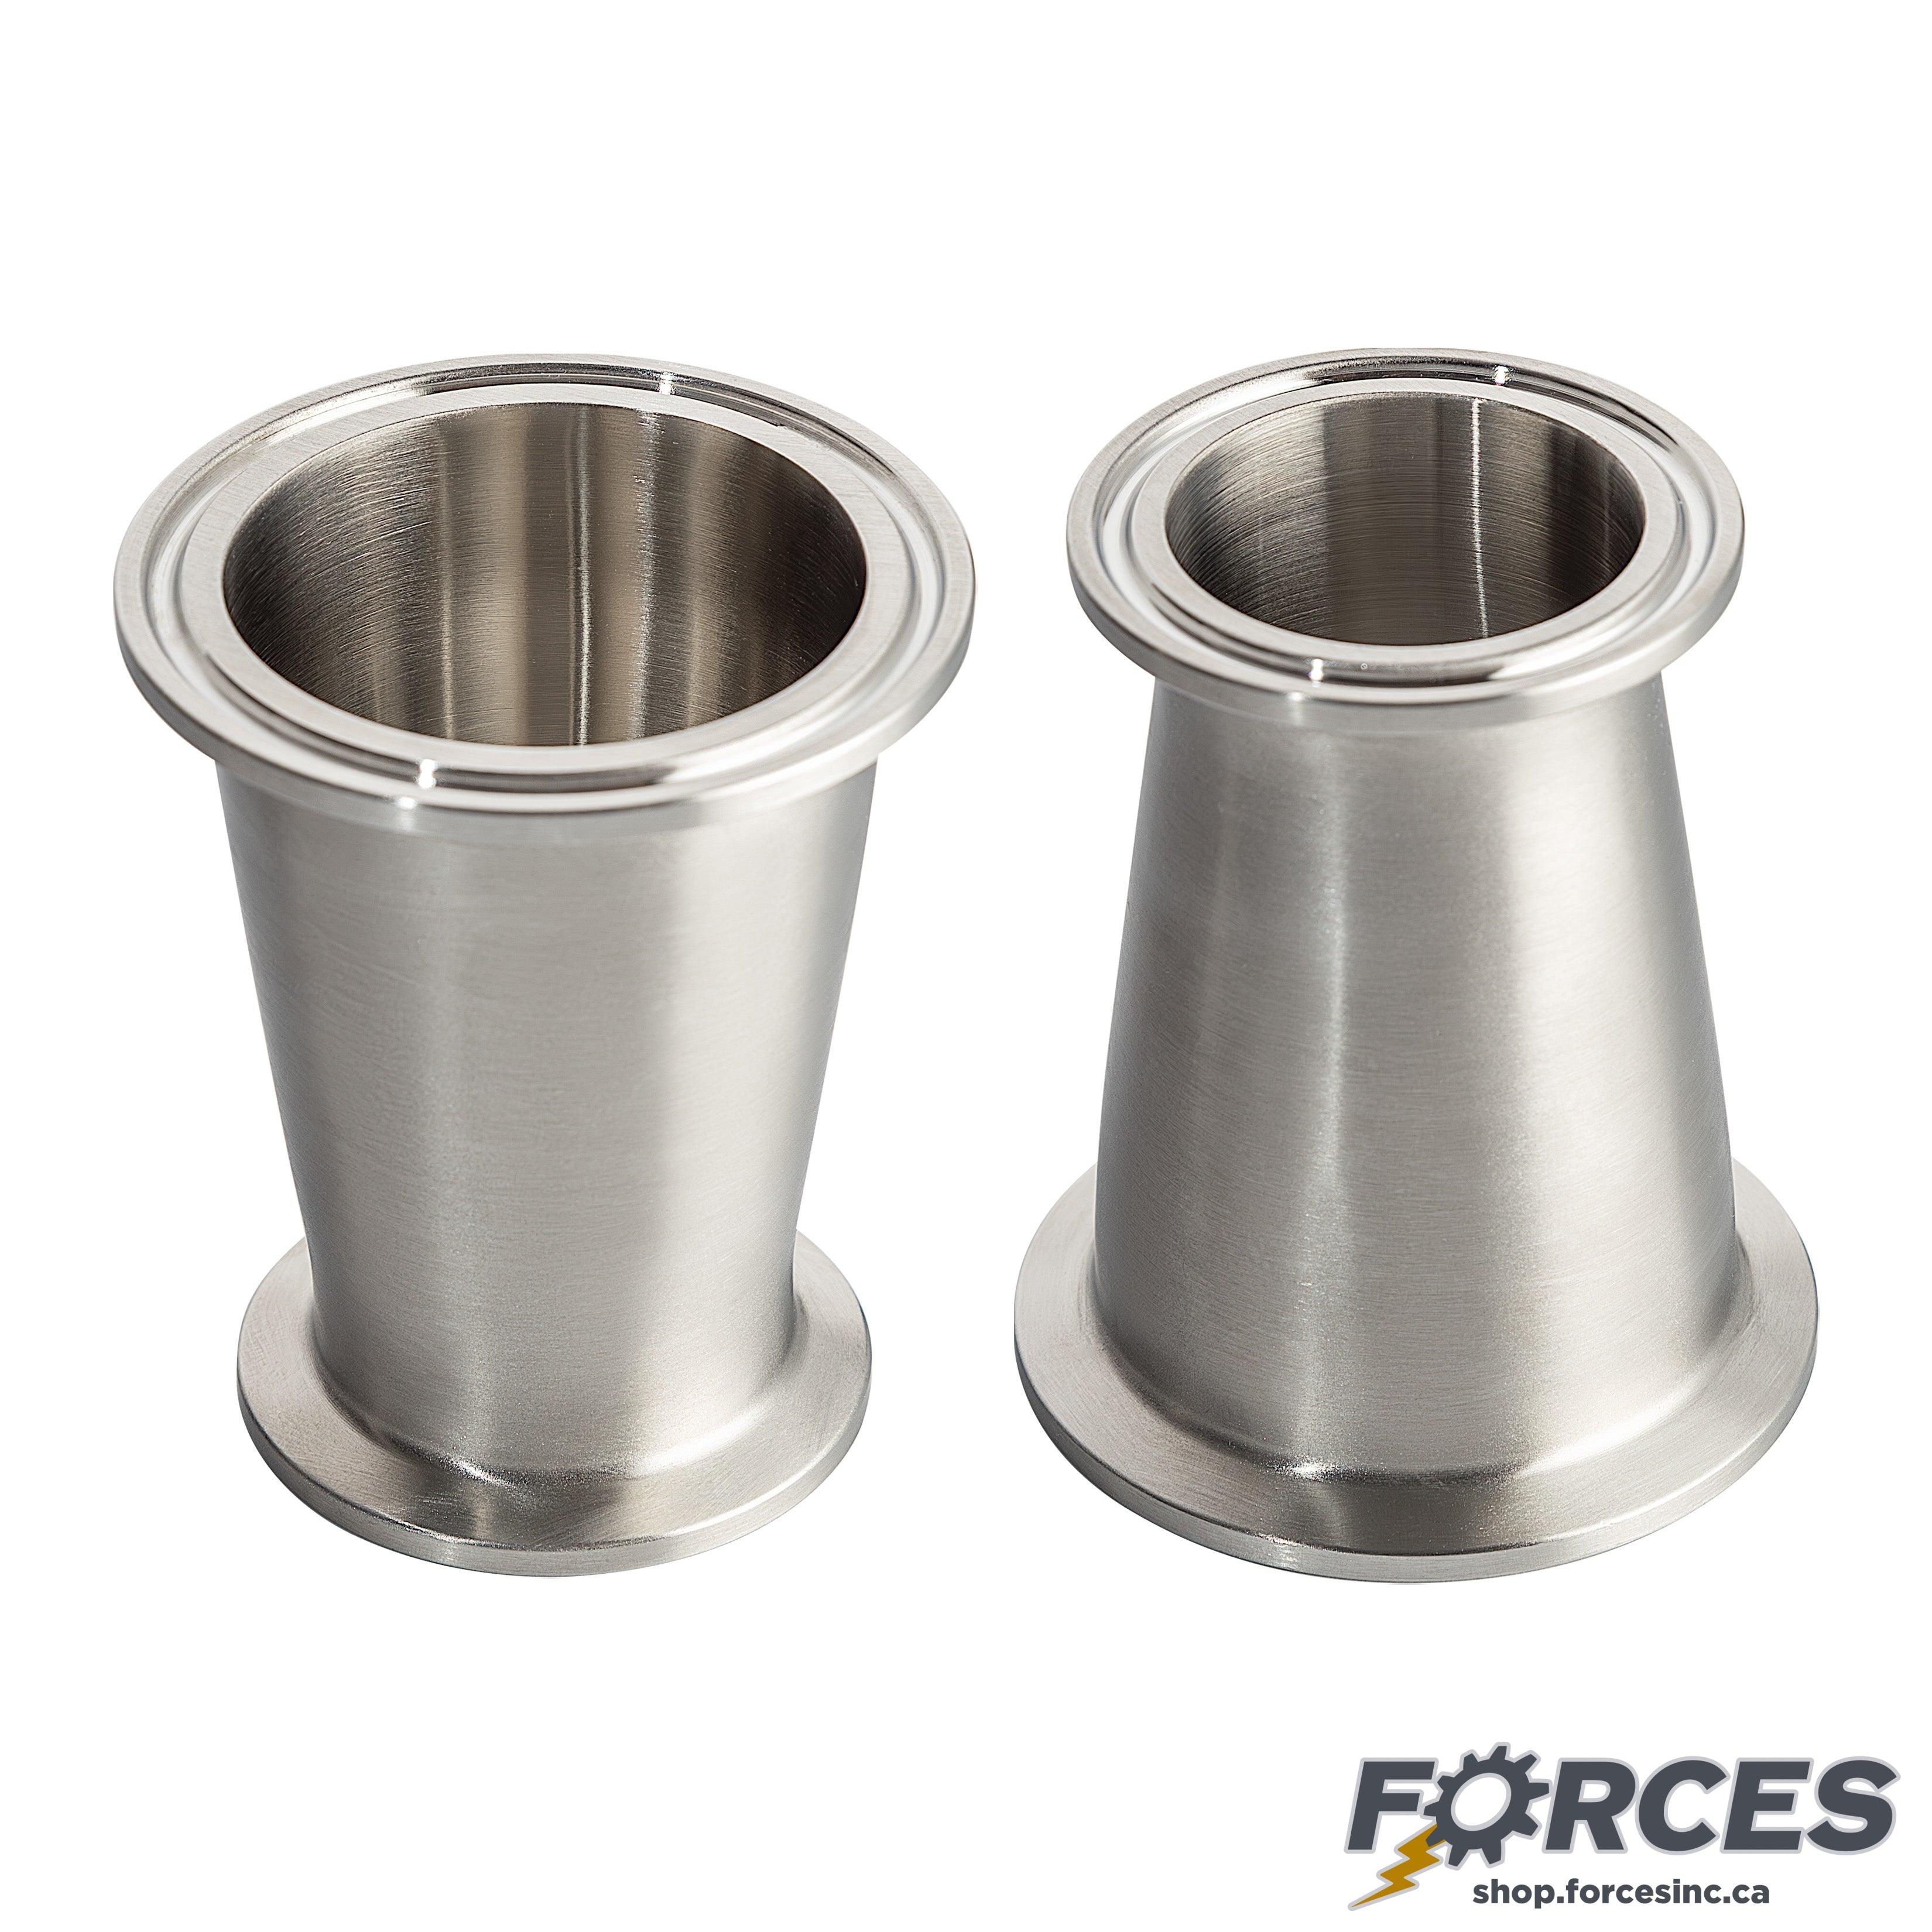 2-1/2" x 1" Tri-Clamp Concentric Reducer - Stainless Steel 316 - Forces Inc